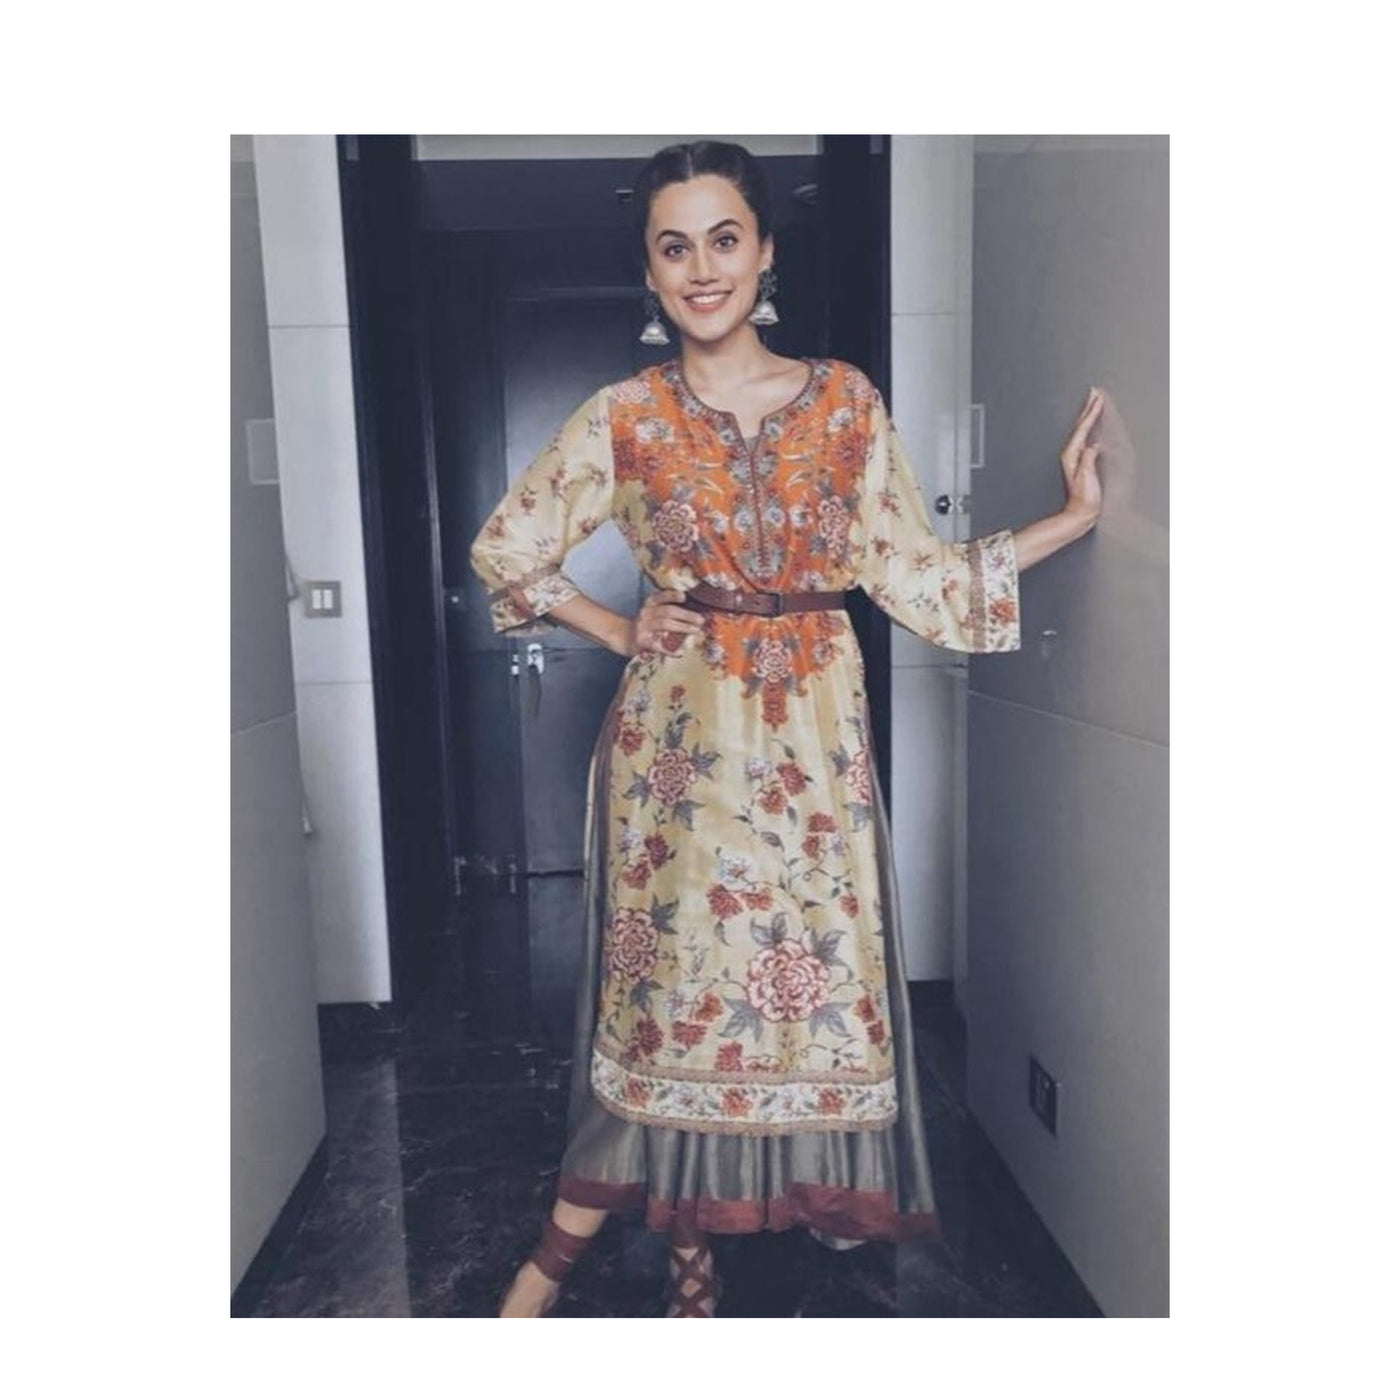 Taapsee Pannu in Sangeeta Boochra Silver Handmade Earrings Studded With Pearls Stone